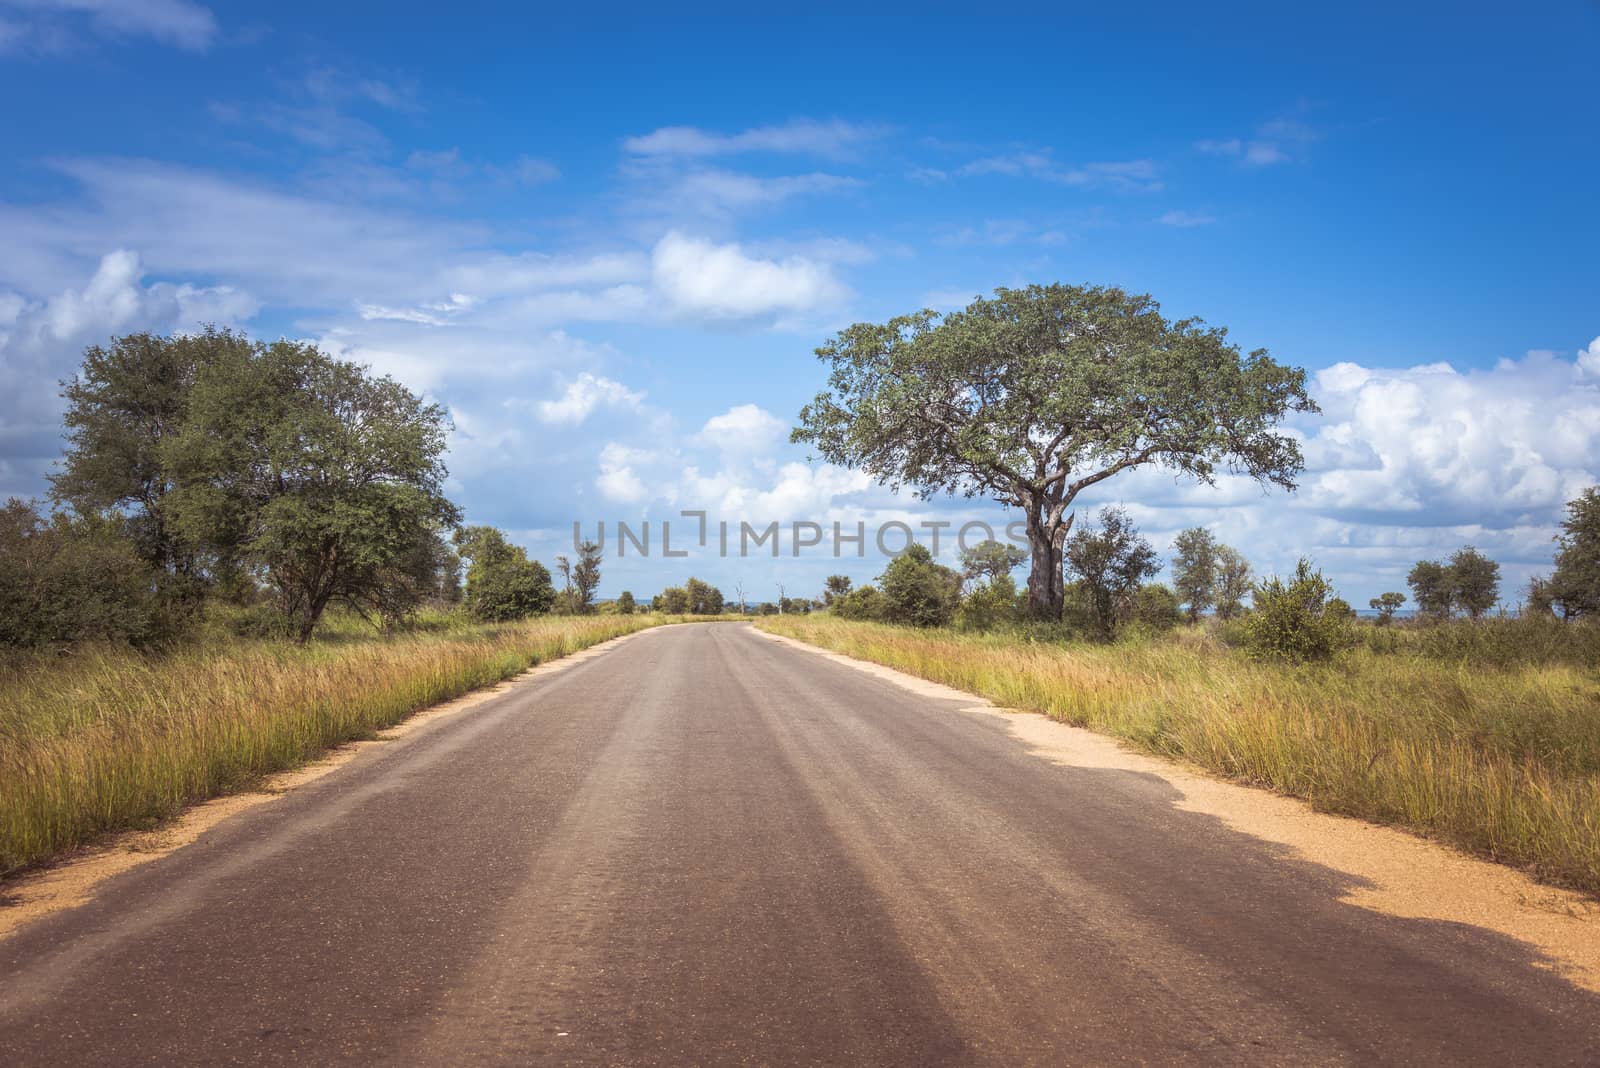 road in the wild nature of south africa in the kruger national park, looking for wild animals and beautifull landscape